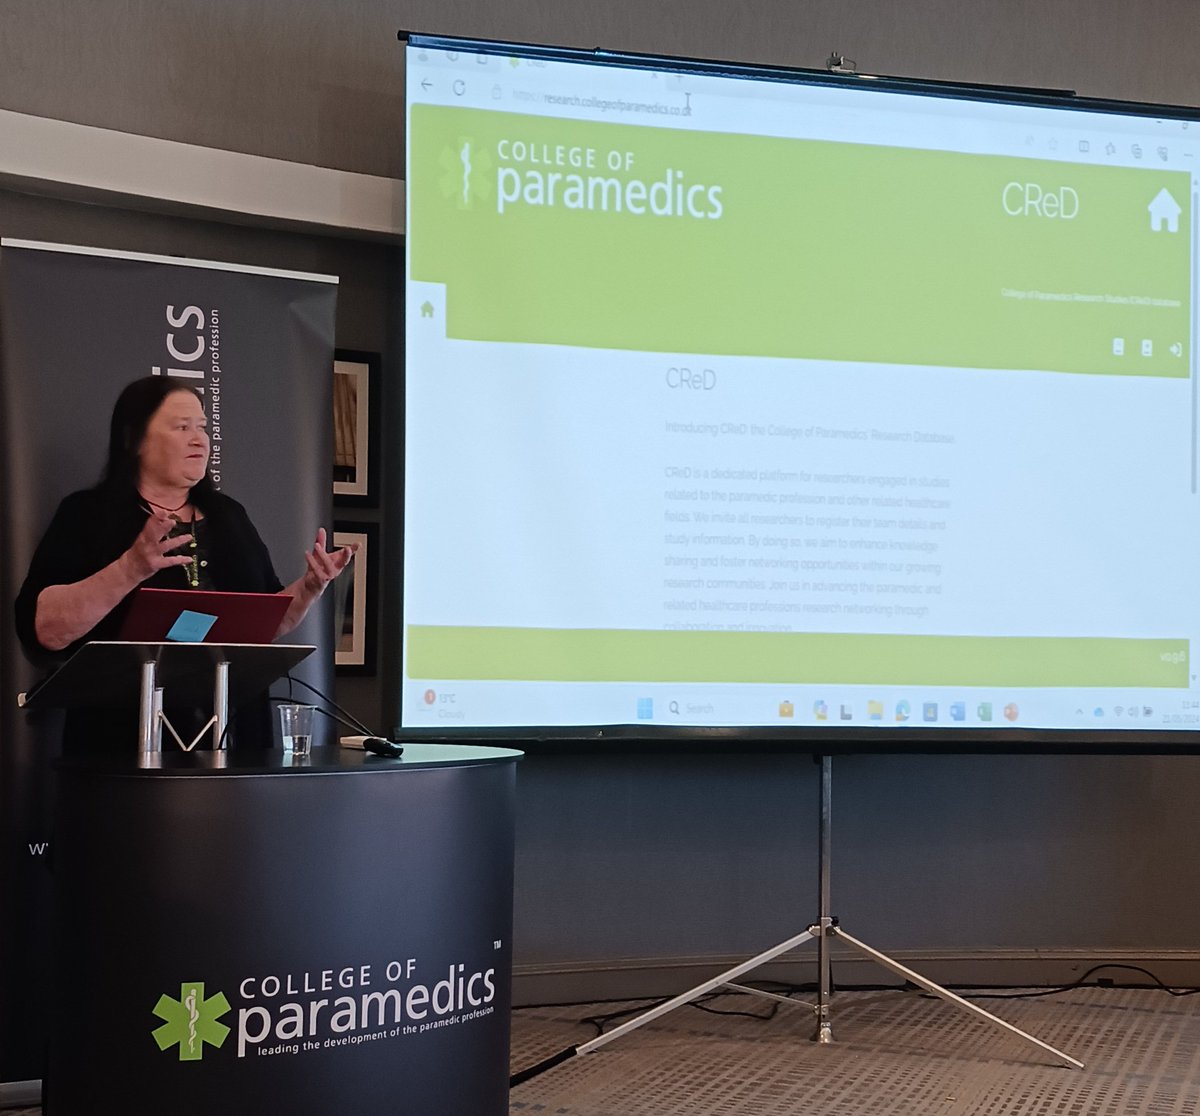 Fantastic initiative from @ParamedicsUK launching CReD - the College of Paramedics Research Database at today's conference - a global open access research database for paramedicine led by @DrJuliaWilliams #Paramedics #Research #ParaResearch